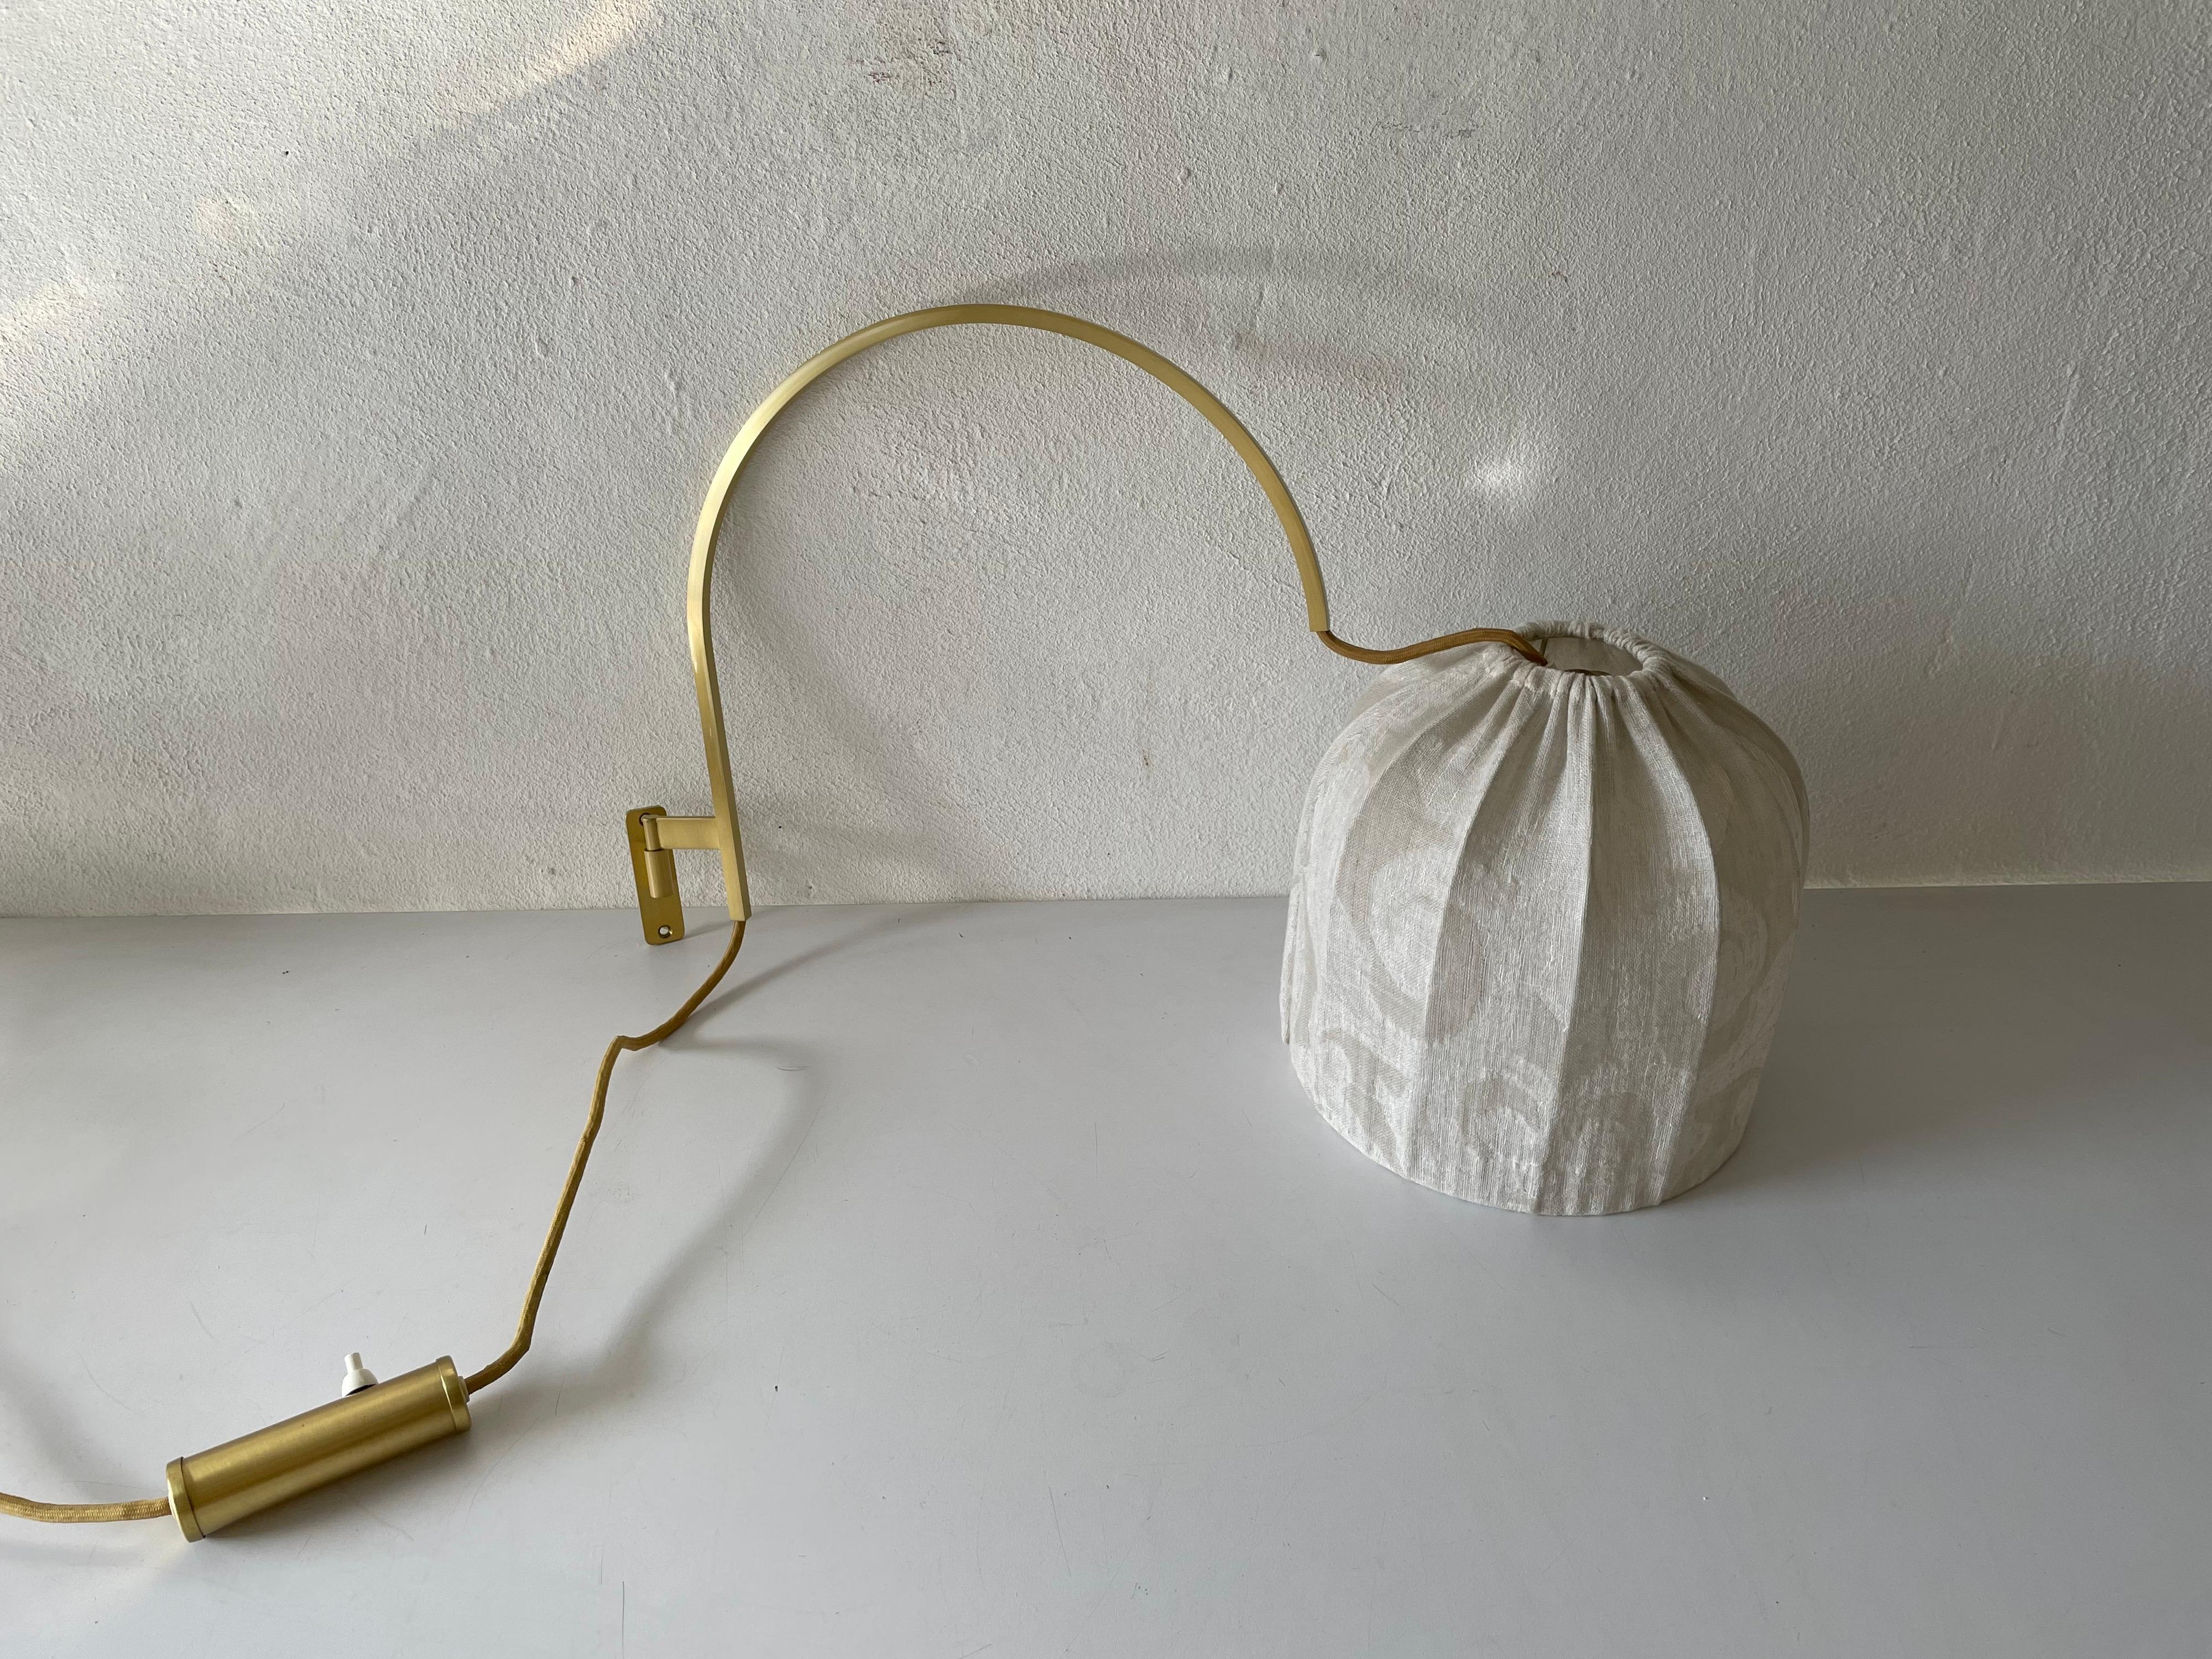 Arch Shaped Brass Body Fabric Shade Wall Lamp by WKR Leuchten, 1970s, Germany For Sale 2